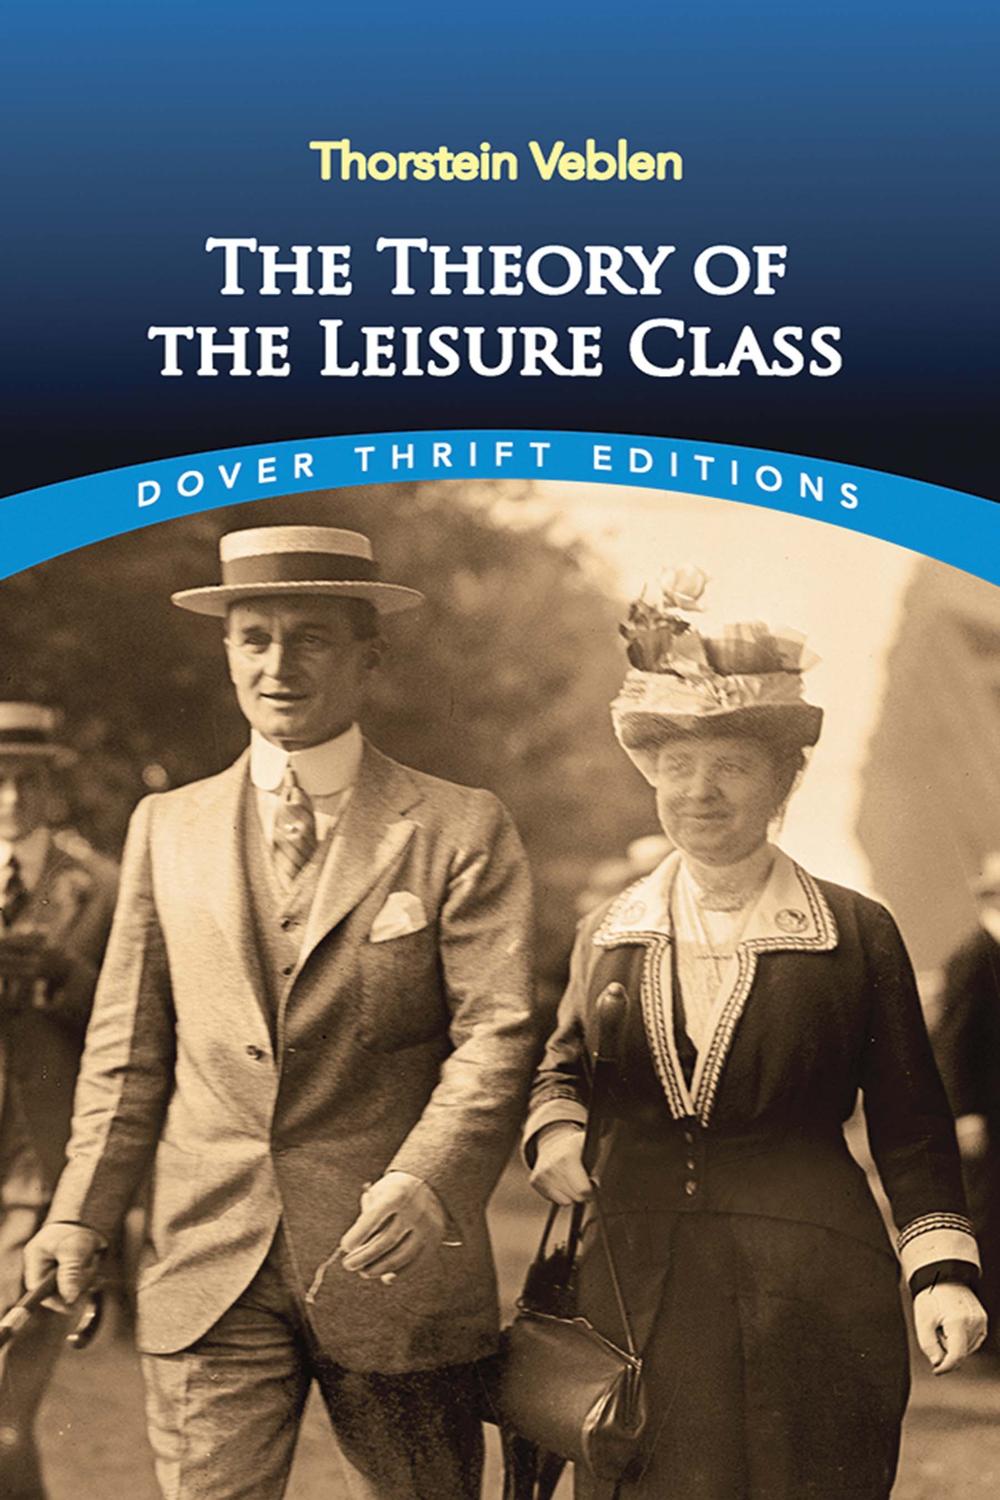 The Theory of the Leisure Class - Thorstein Veblen,,